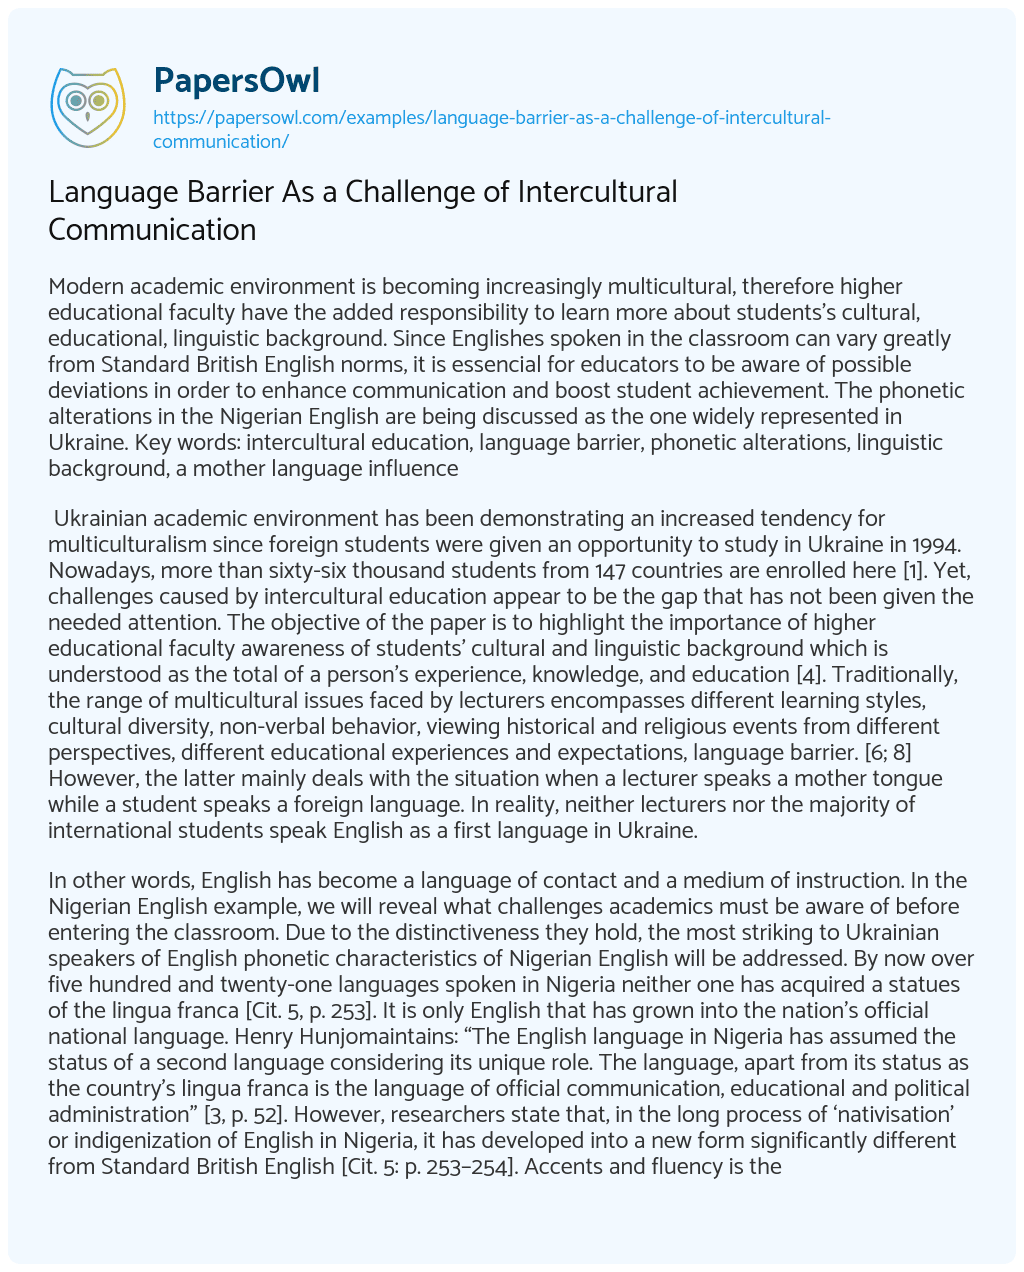 Essay on Language Barrier as a Challenge of Intercultural Communication